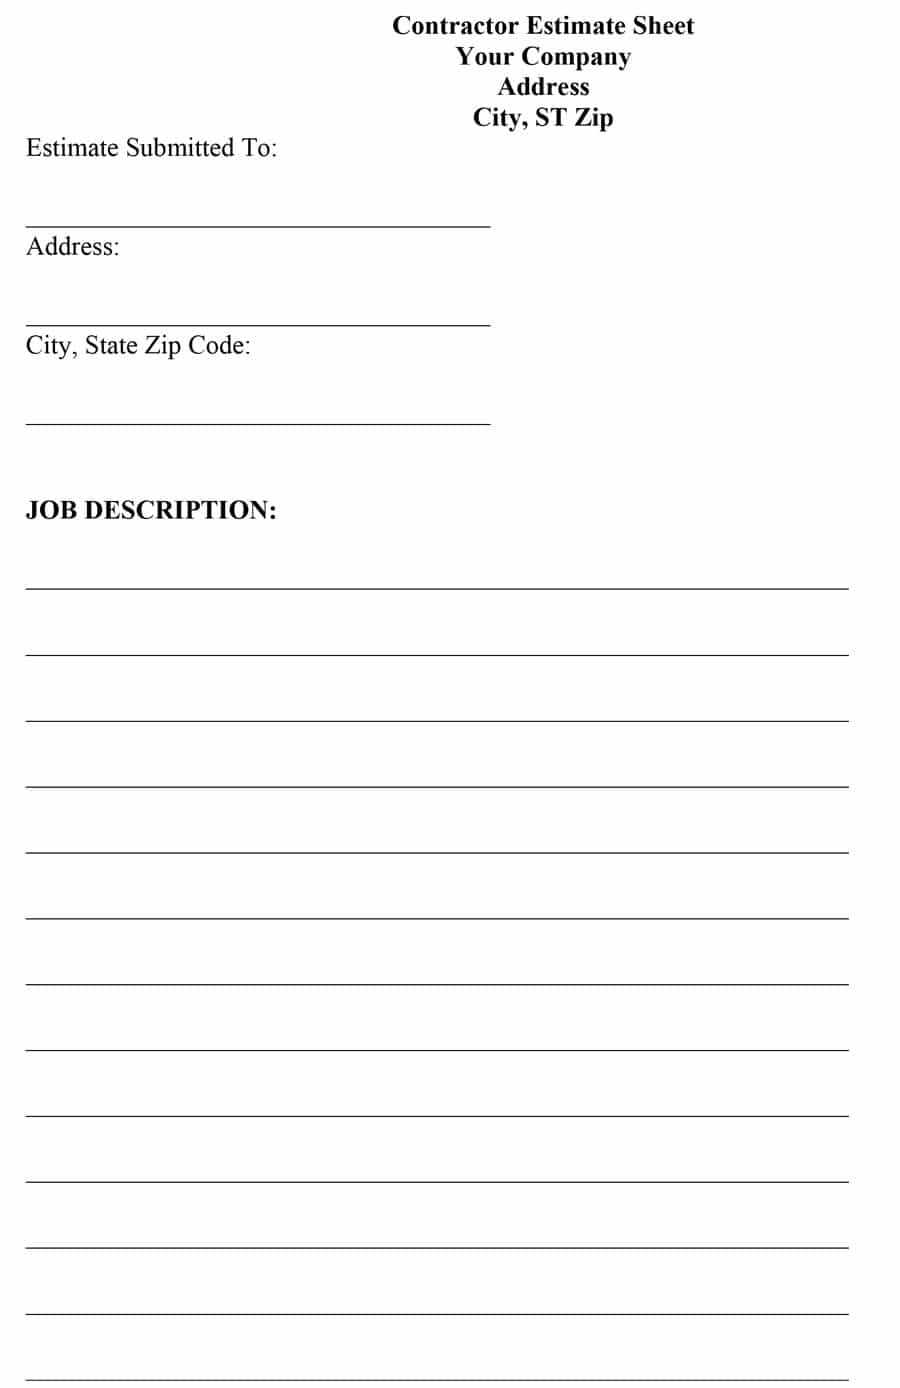 44 Free Estimate Template Forms [Construction, Repair Within Work Estimate Template Word